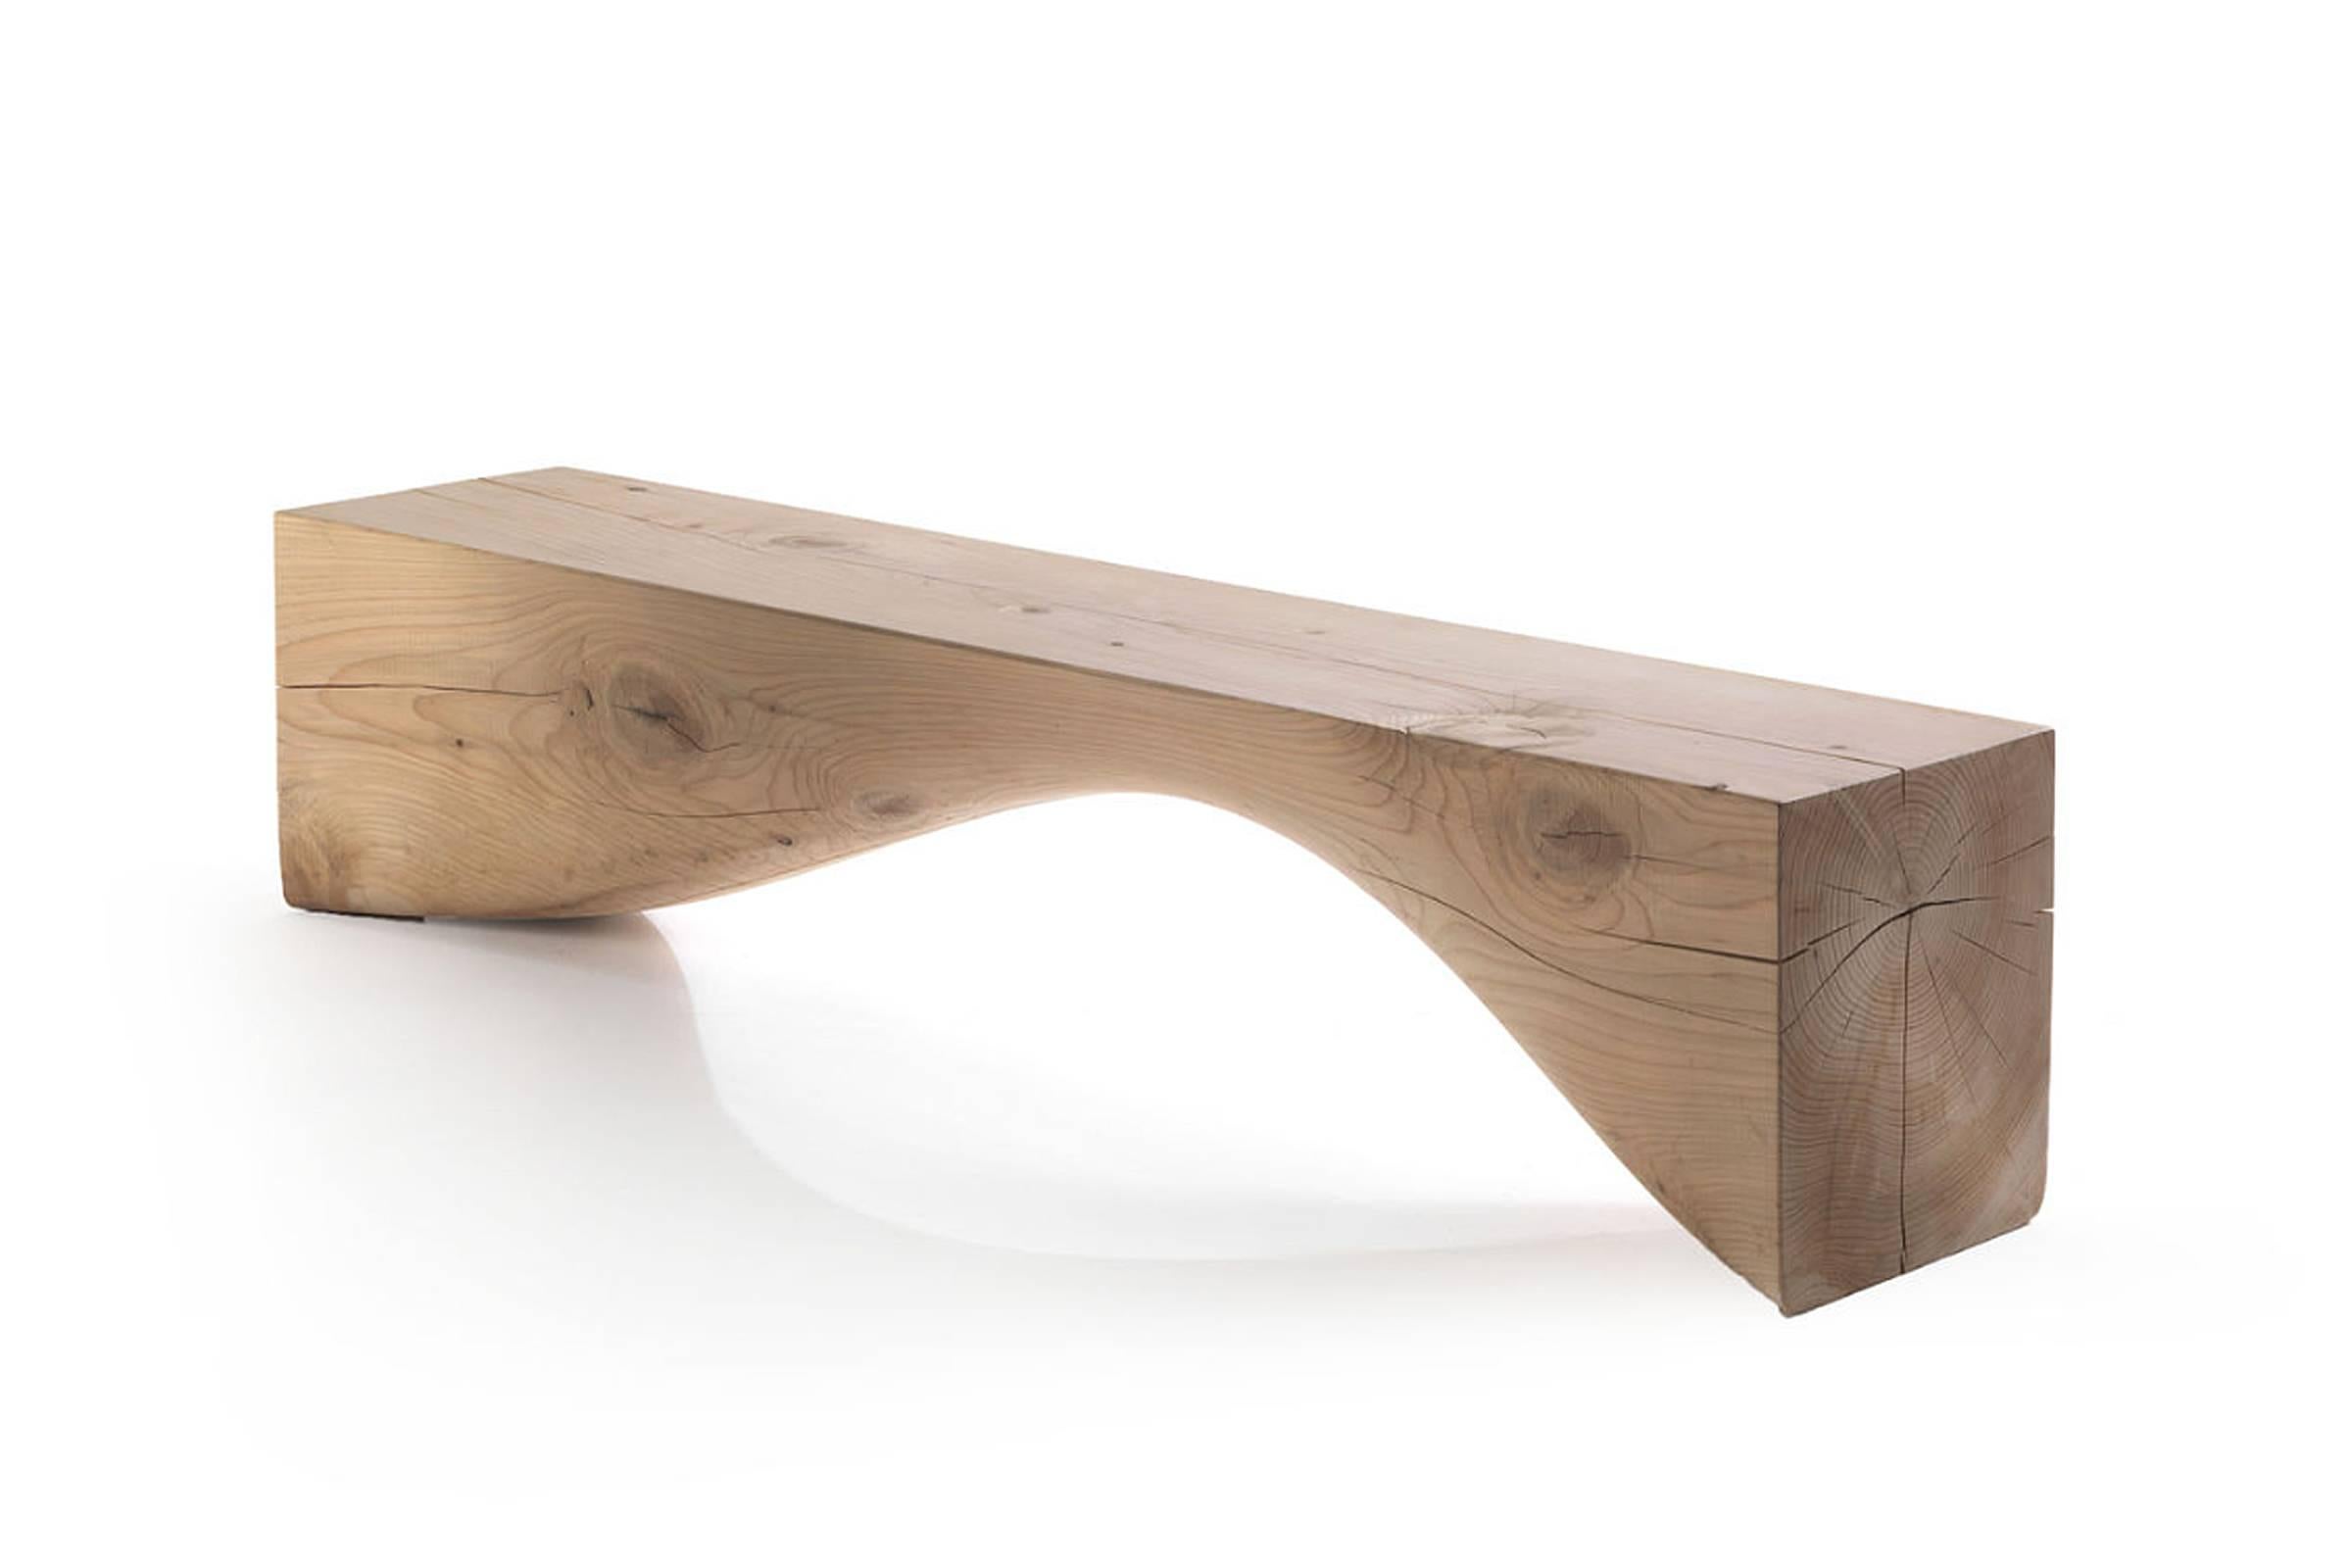 Bench line in natural solid cedar wood.
Wood treated with natural pine extracts wax.
Also available on request in:
L120xD36,7xH45cm, price: 5700,00€
L180xD36,7xH45cm, price: 7400,00€
L240xD36,7xH45cm, price: 9200,00€
Bench available in black burnt